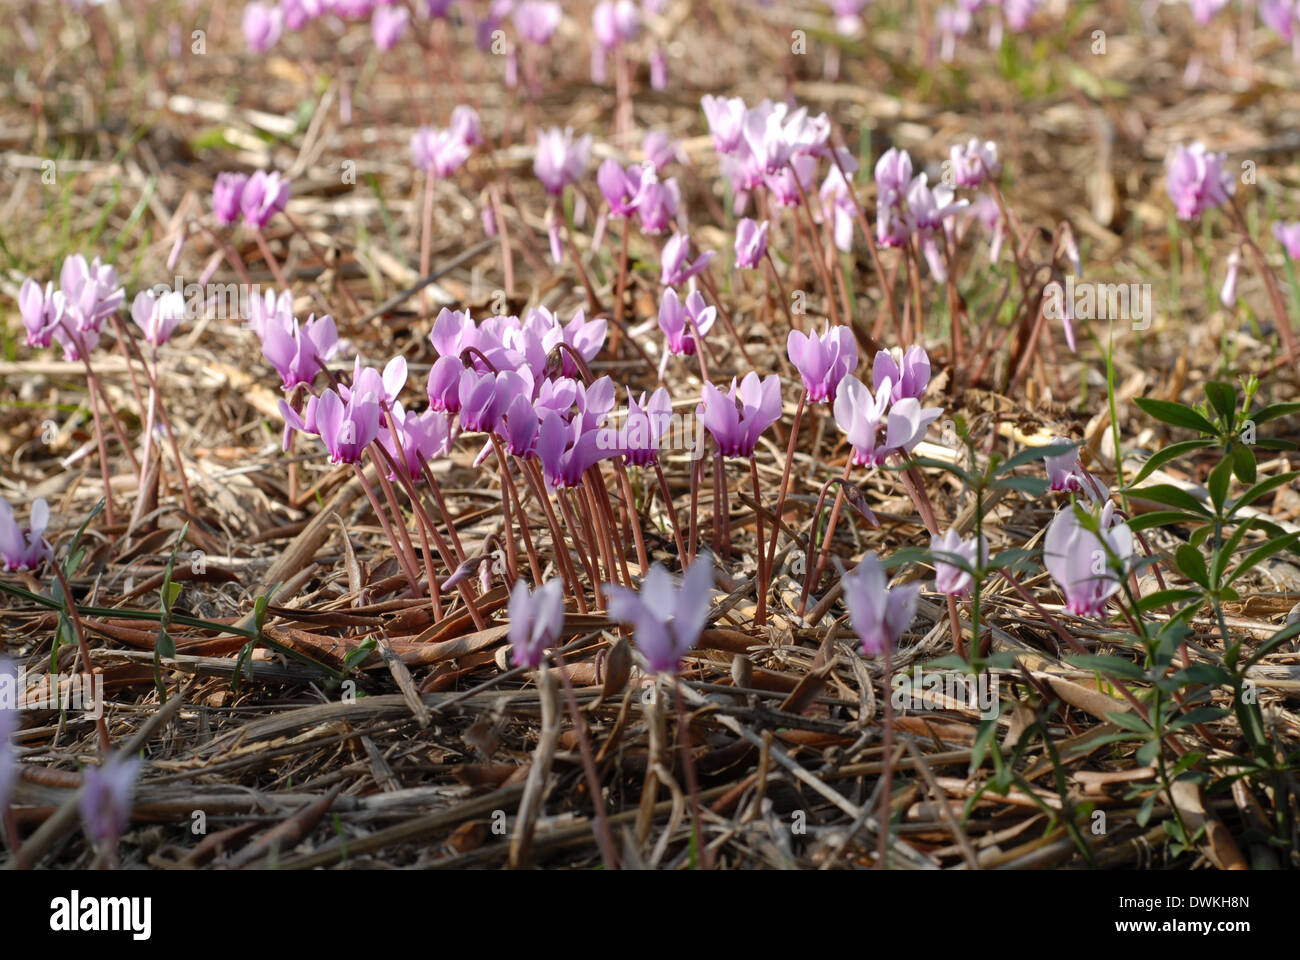 Cyclamen, flowers, growing, wild, gardening, vocation, hobbies, recreation, old age, retirement, Stock Photo